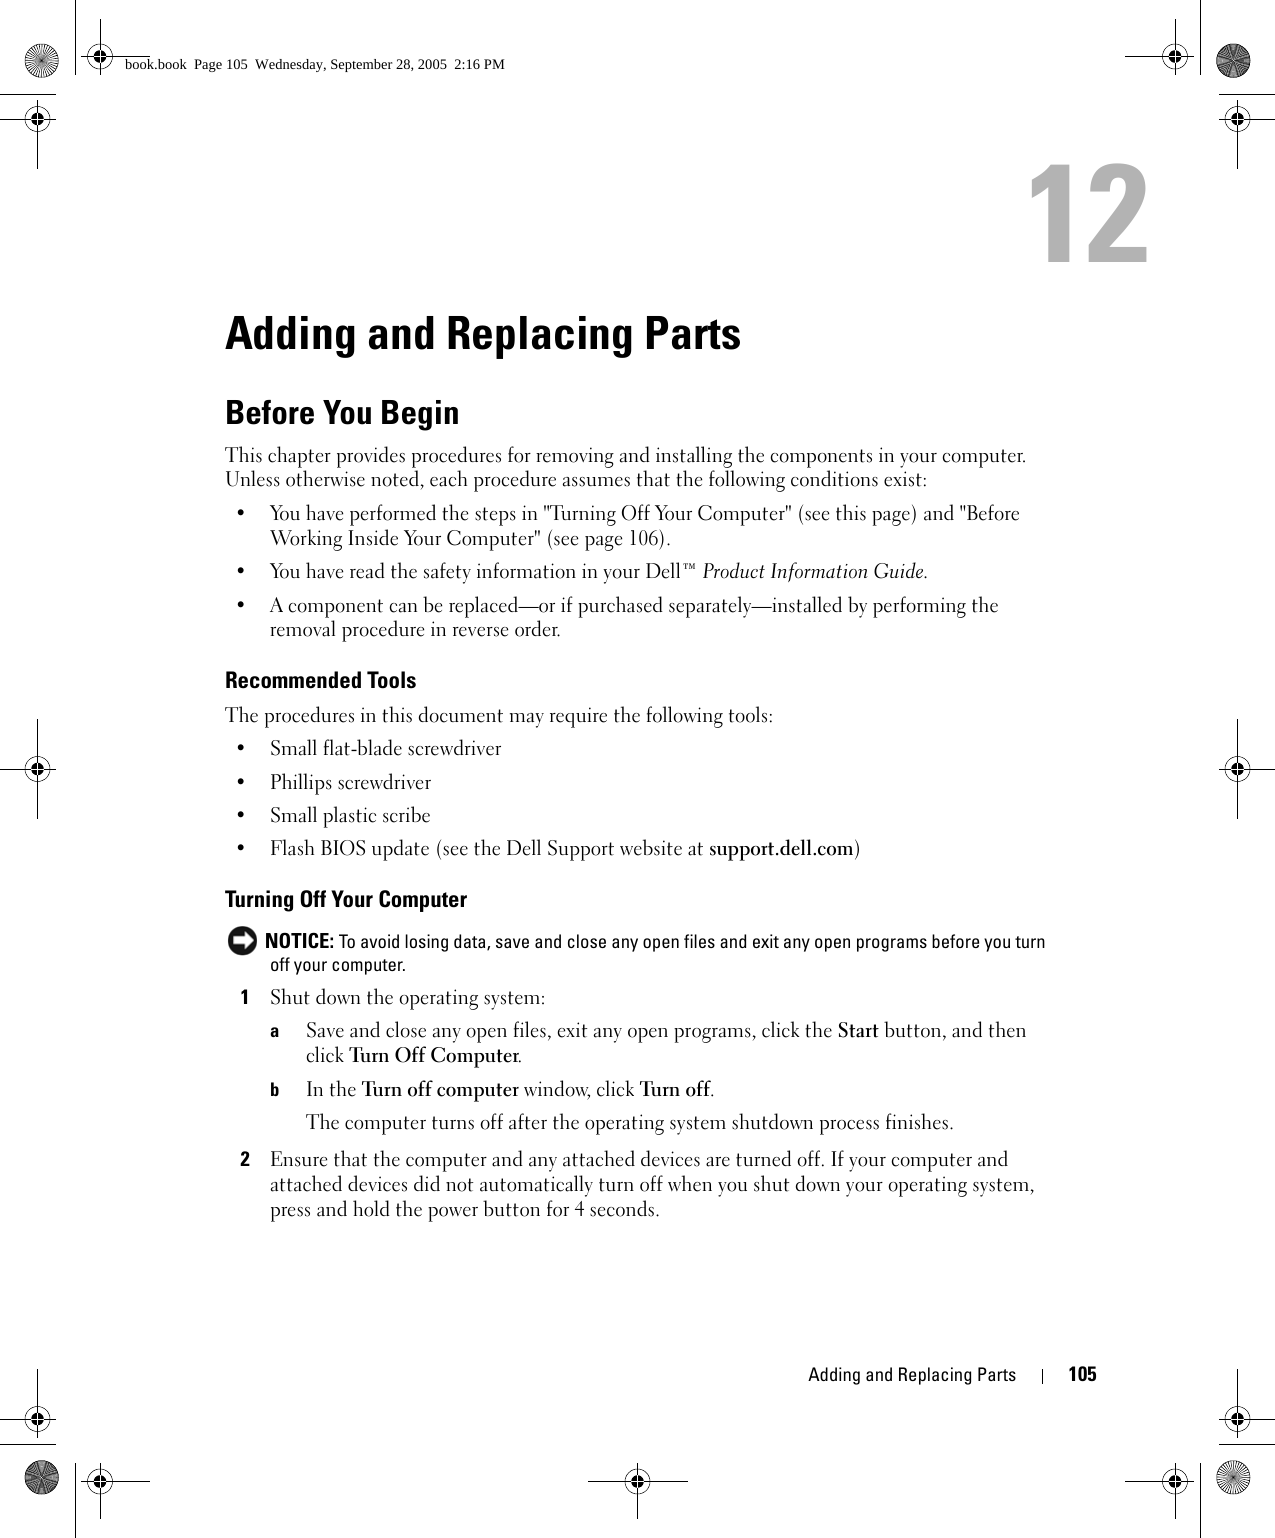 Adding and Replacing Parts 10512Adding and Replacing PartsBefore You BeginThis chapter provides procedures for removing and installing the components in your computer. Unless otherwise noted, each procedure assumes that the following conditions exist:• You have performed the steps in &quot;Turning Off Your Computer&quot; (see this page) and &quot;Before Working Inside Your Computer&quot; (see page 106).• You have read the safety information in your Dell™ Product Information Guide.• A component can be replaced—or if purchased separately—installed by performing the removal procedure in reverse order.Recommended ToolsThe procedures in this document may require the following tools:• Small flat-blade screwdriver• Phillips screwdriver• Small plastic scribe• Flash BIOS update (see the Dell Support website at support.dell.com)Turning Off Your Computer NOTICE: To avoid losing data, save and close any open files and exit any open programs before you turn off your computer.1Shut down the operating system:aSave and close any open files, exit any open programs, click the Start button, and then click Turn Off Computer.bIn the Tur n of f co m put e r window, click Tur n  off. The computer turns off after the operating system shutdown process finishes.2Ensure that the computer and any attached devices are turned off. If your computer and attached devices did not automatically turn off when you shut down your operating system, press and hold the power button for 4 seconds.book.book  Page 105  Wednesday, September 28, 2005  2:16 PM